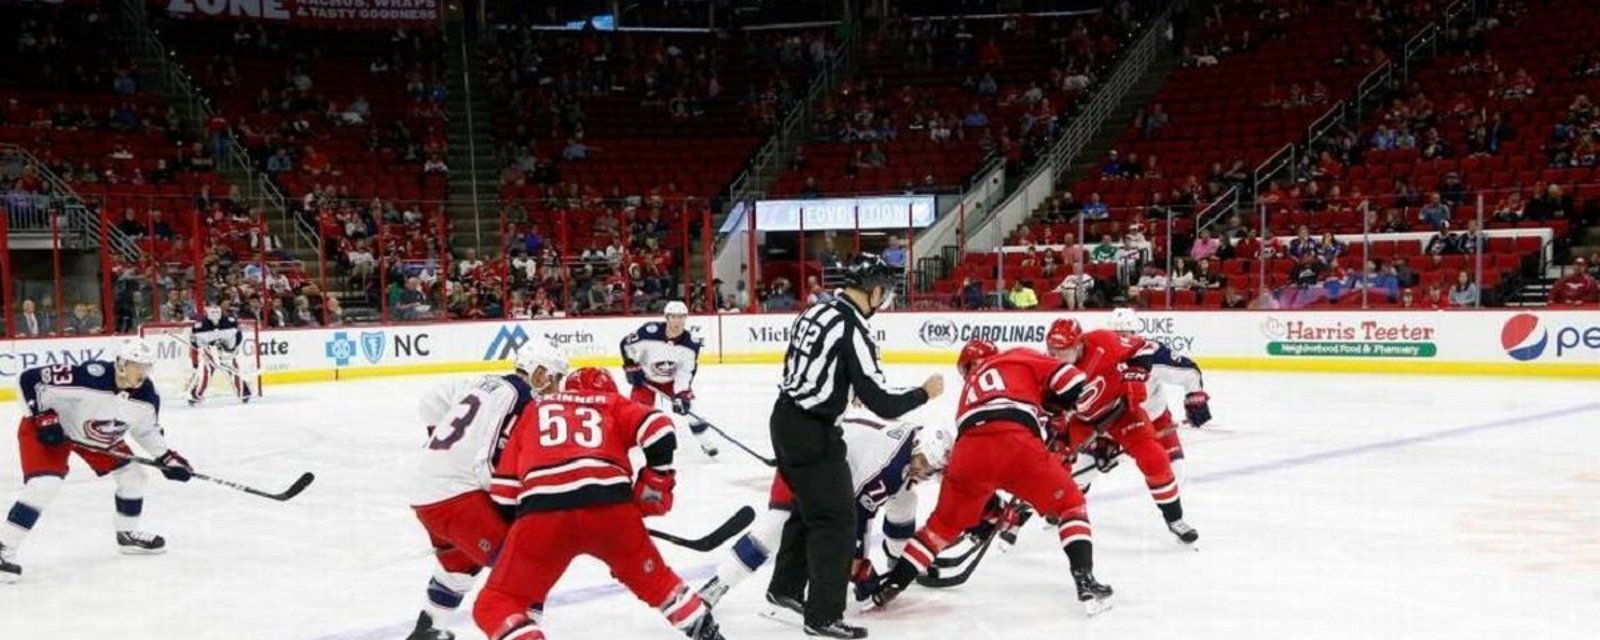 Breaking: Major update on the sale of the Carolina Hurricanes.